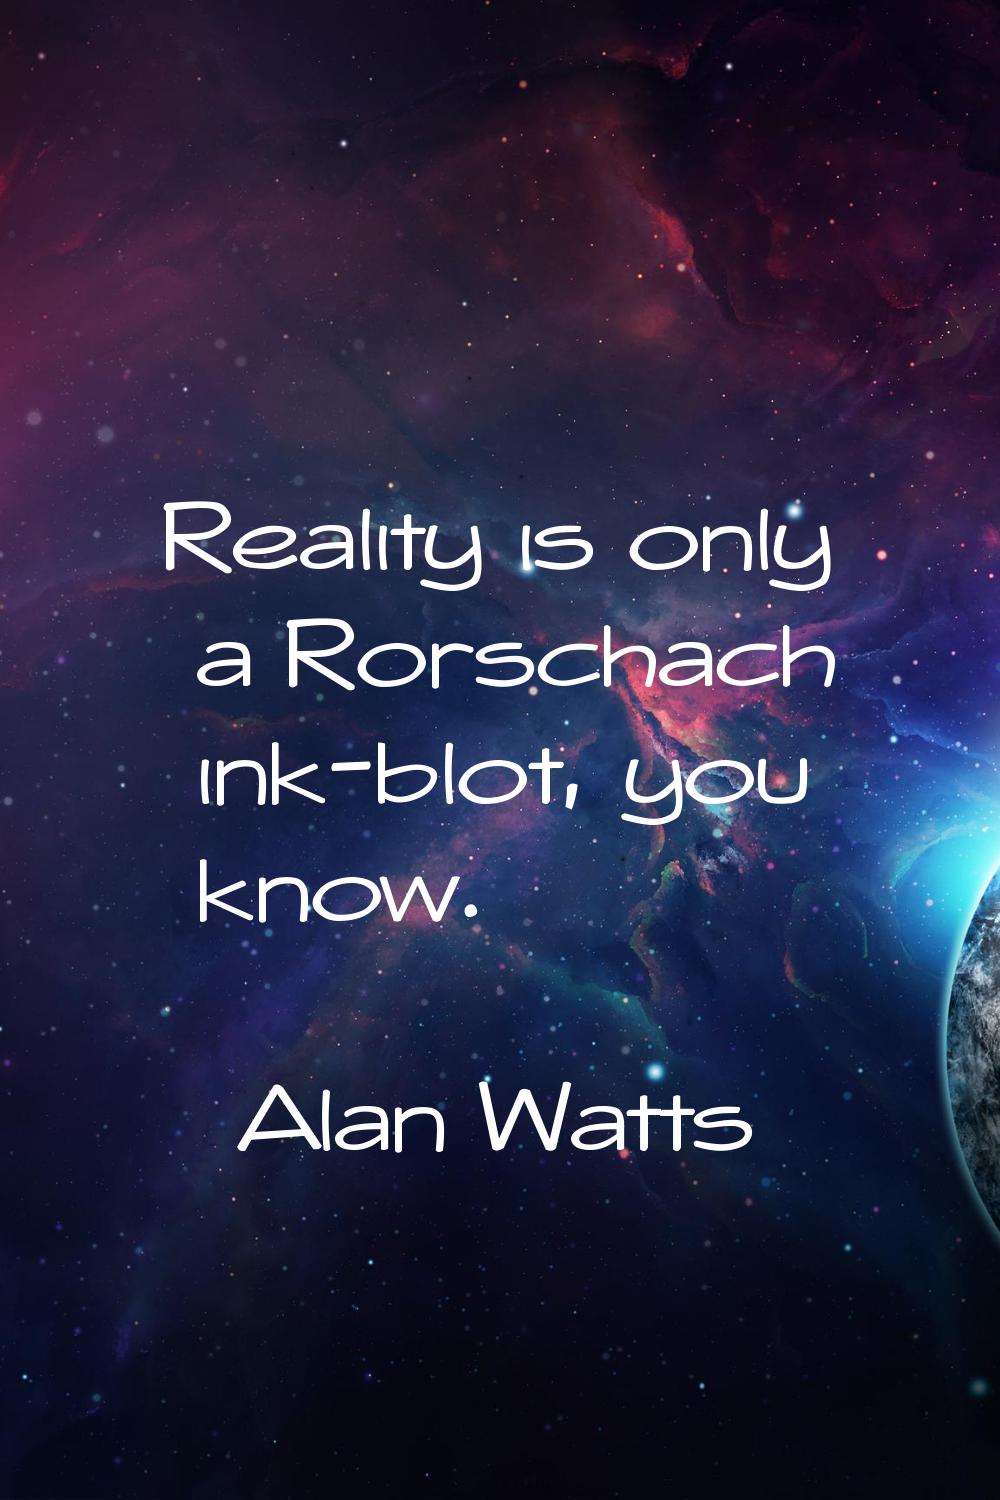 Reality is only a Rorschach ink-blot, you know.